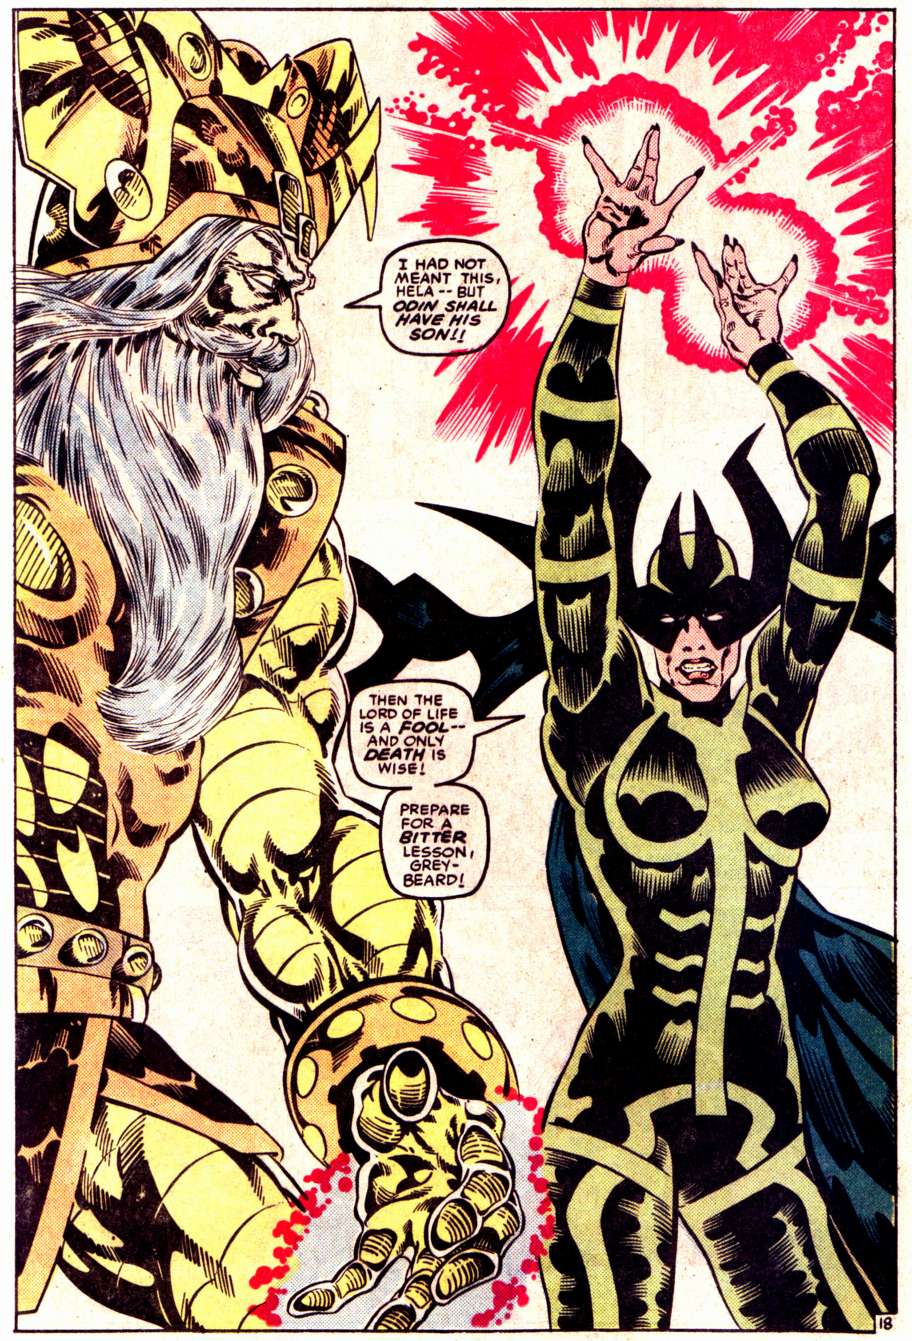 What If? (1977) issue 47 - Loki had found The hammer of Thor - Page 19